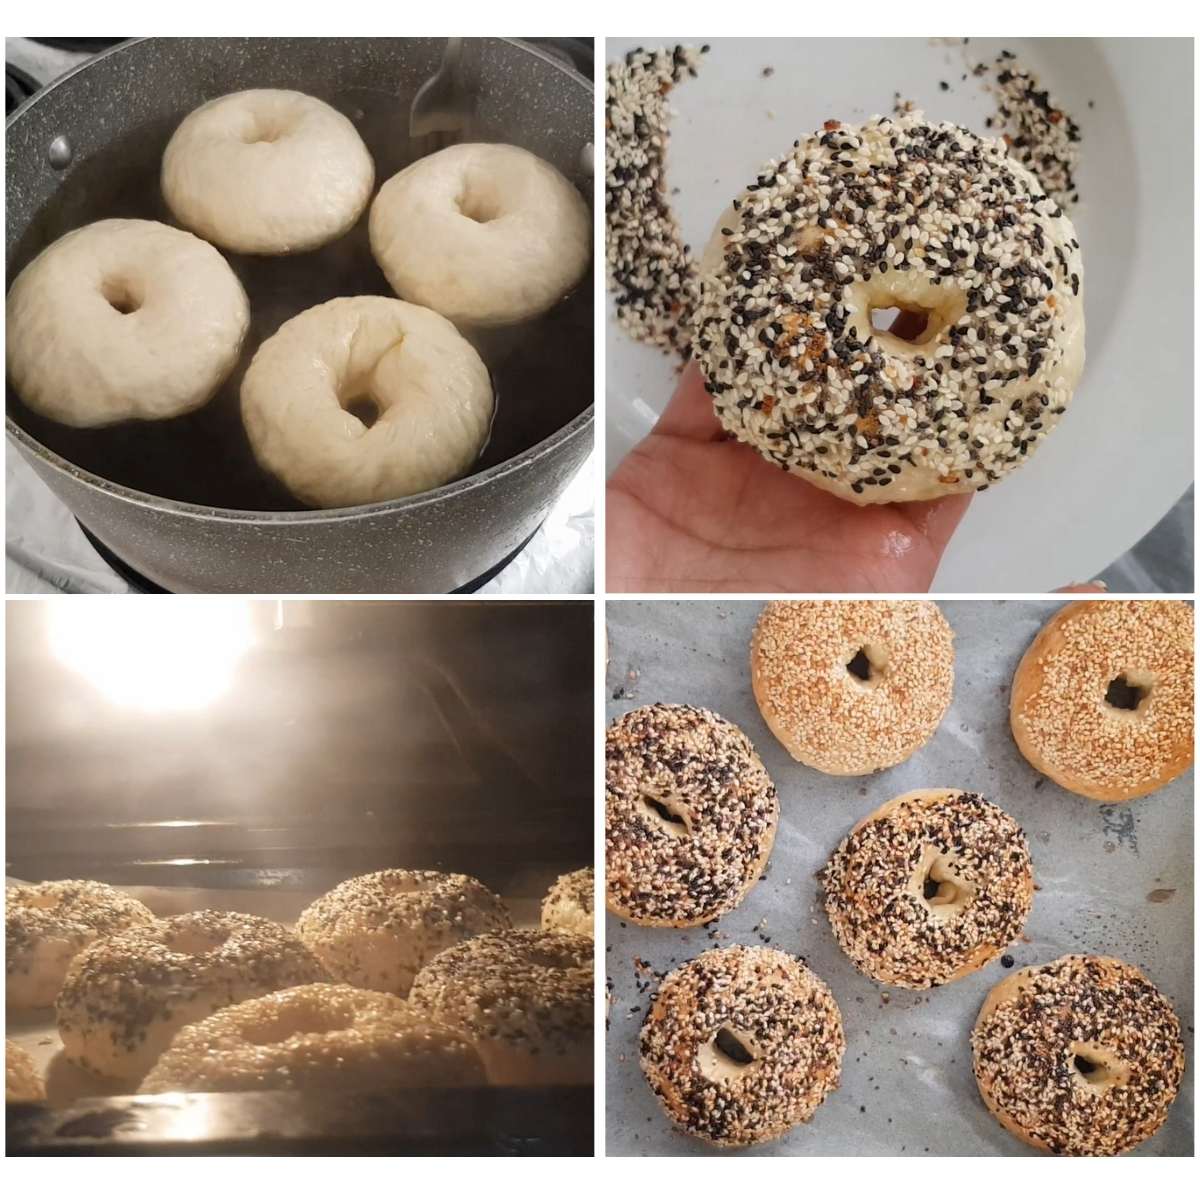 boiling and baking the bagels